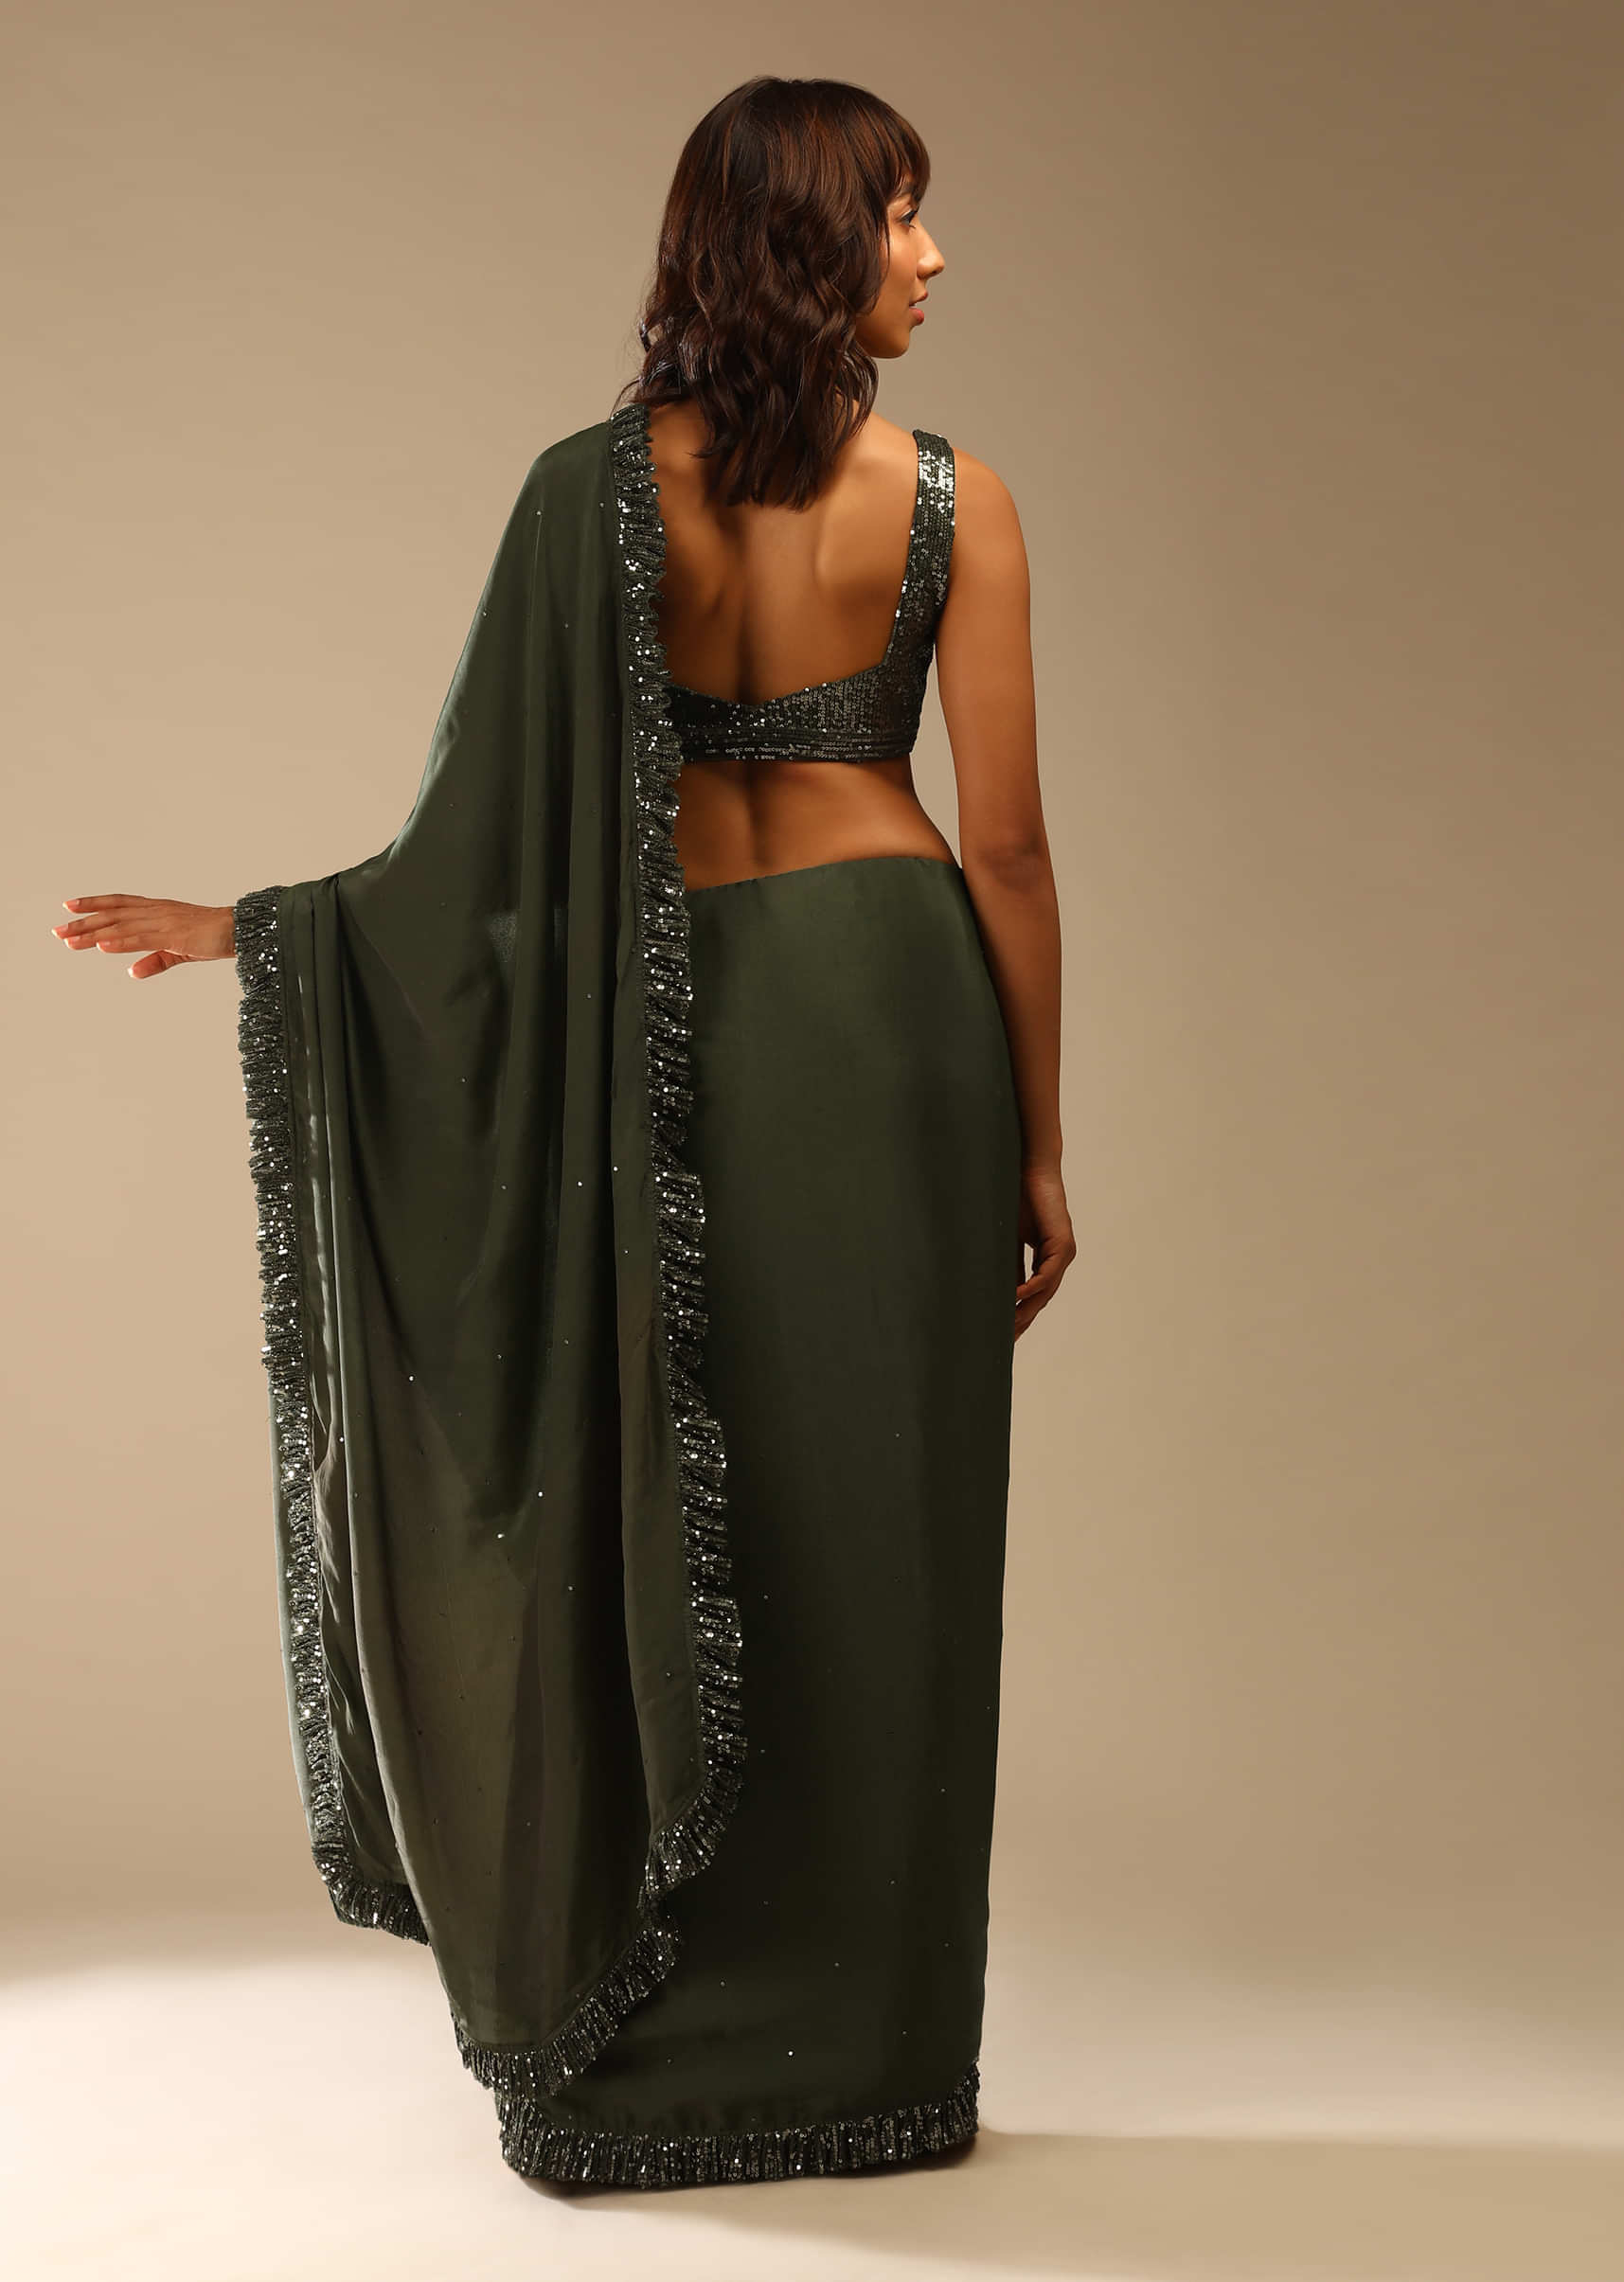 Olive Green Saree In Crepe With Sequins Ruffle On The Border, Sequins Blouse With Front Cut Out And Embellished Belt  